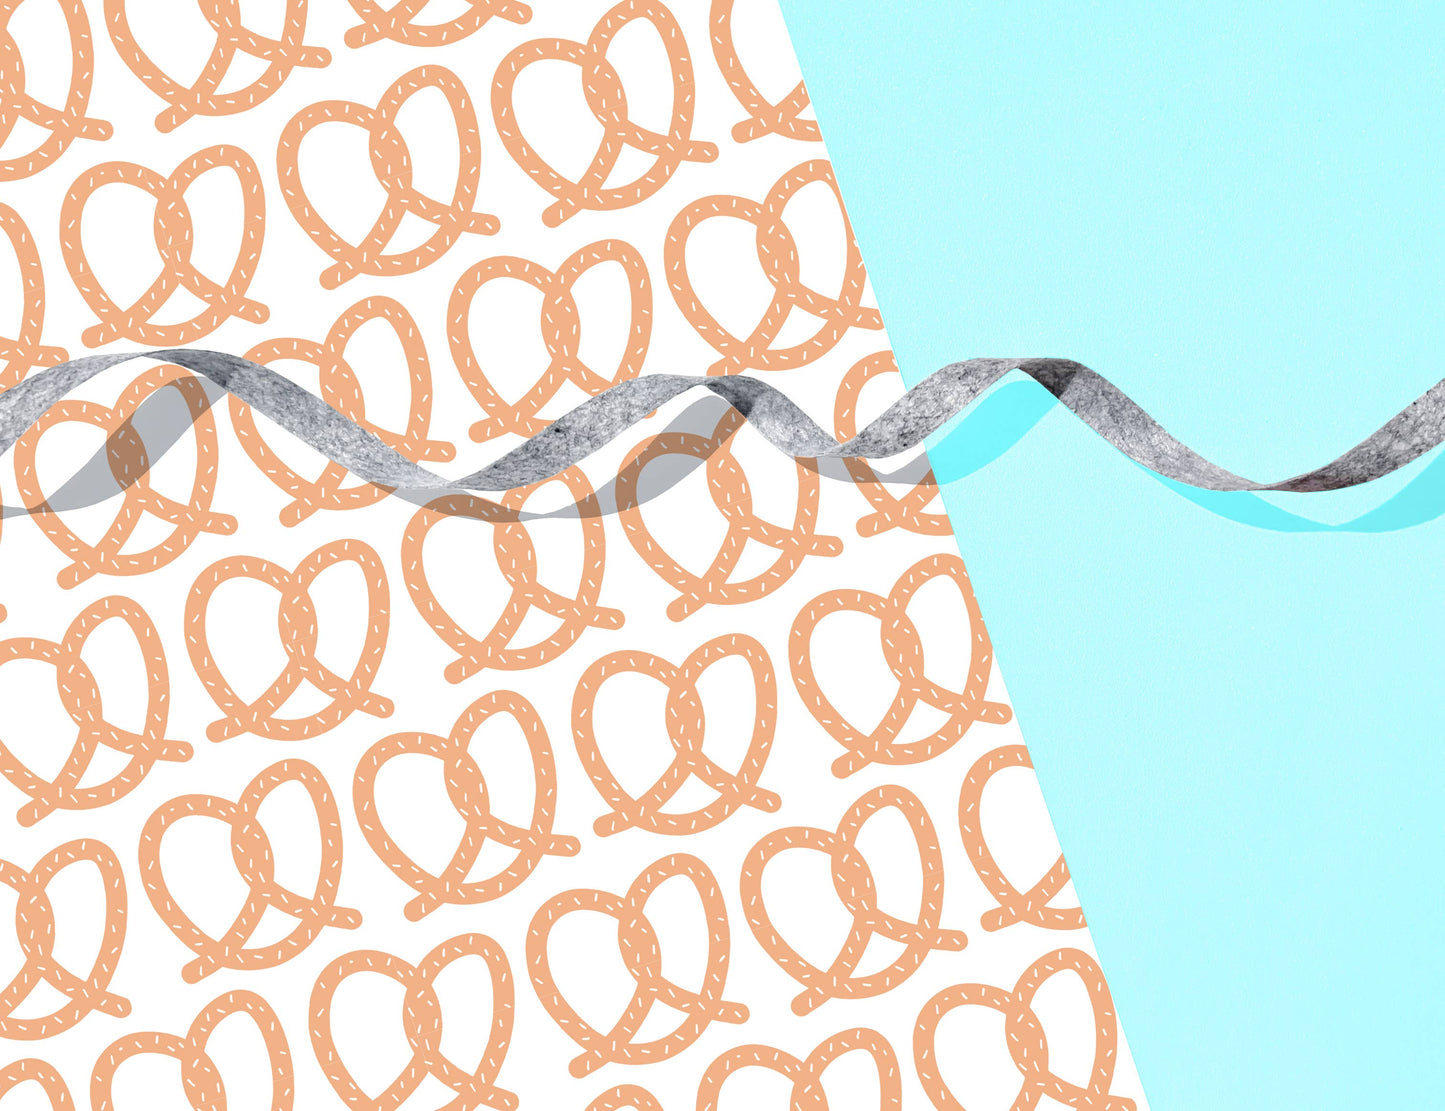 Wrapping paper with pretzels on it 